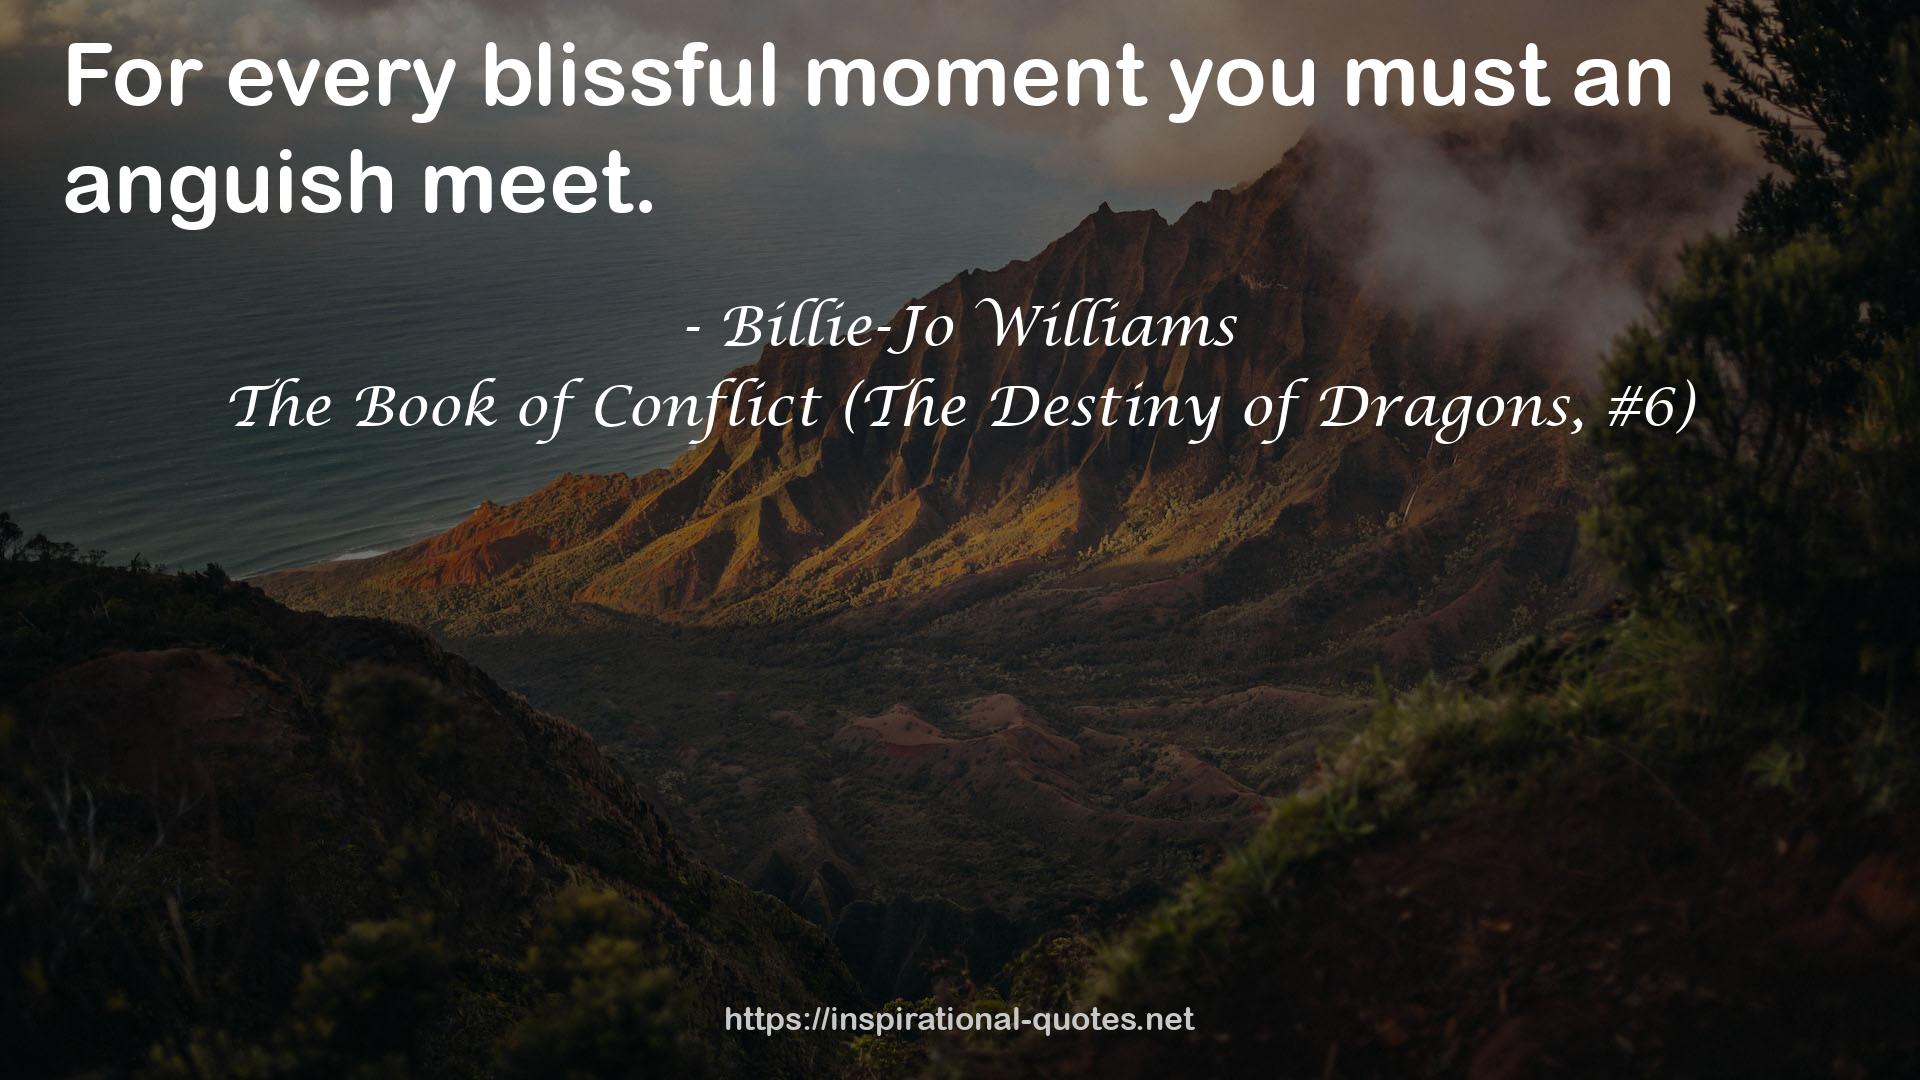 The Book of Conflict (The Destiny of Dragons, #6) QUOTES